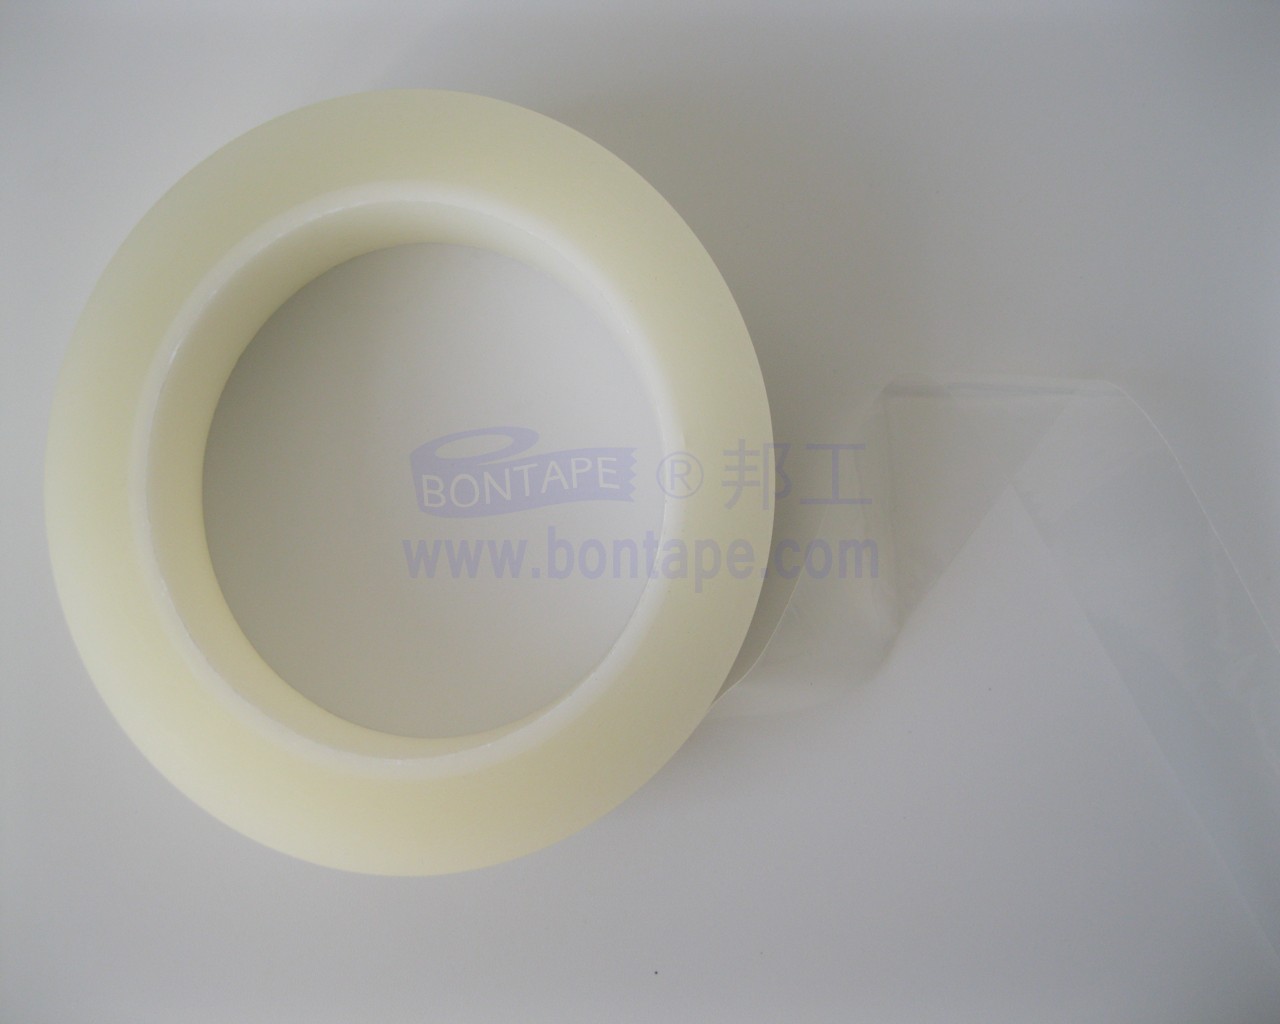 cleanly sealing tape without residue, no ghosting tape, wafer shipping box sealed tape